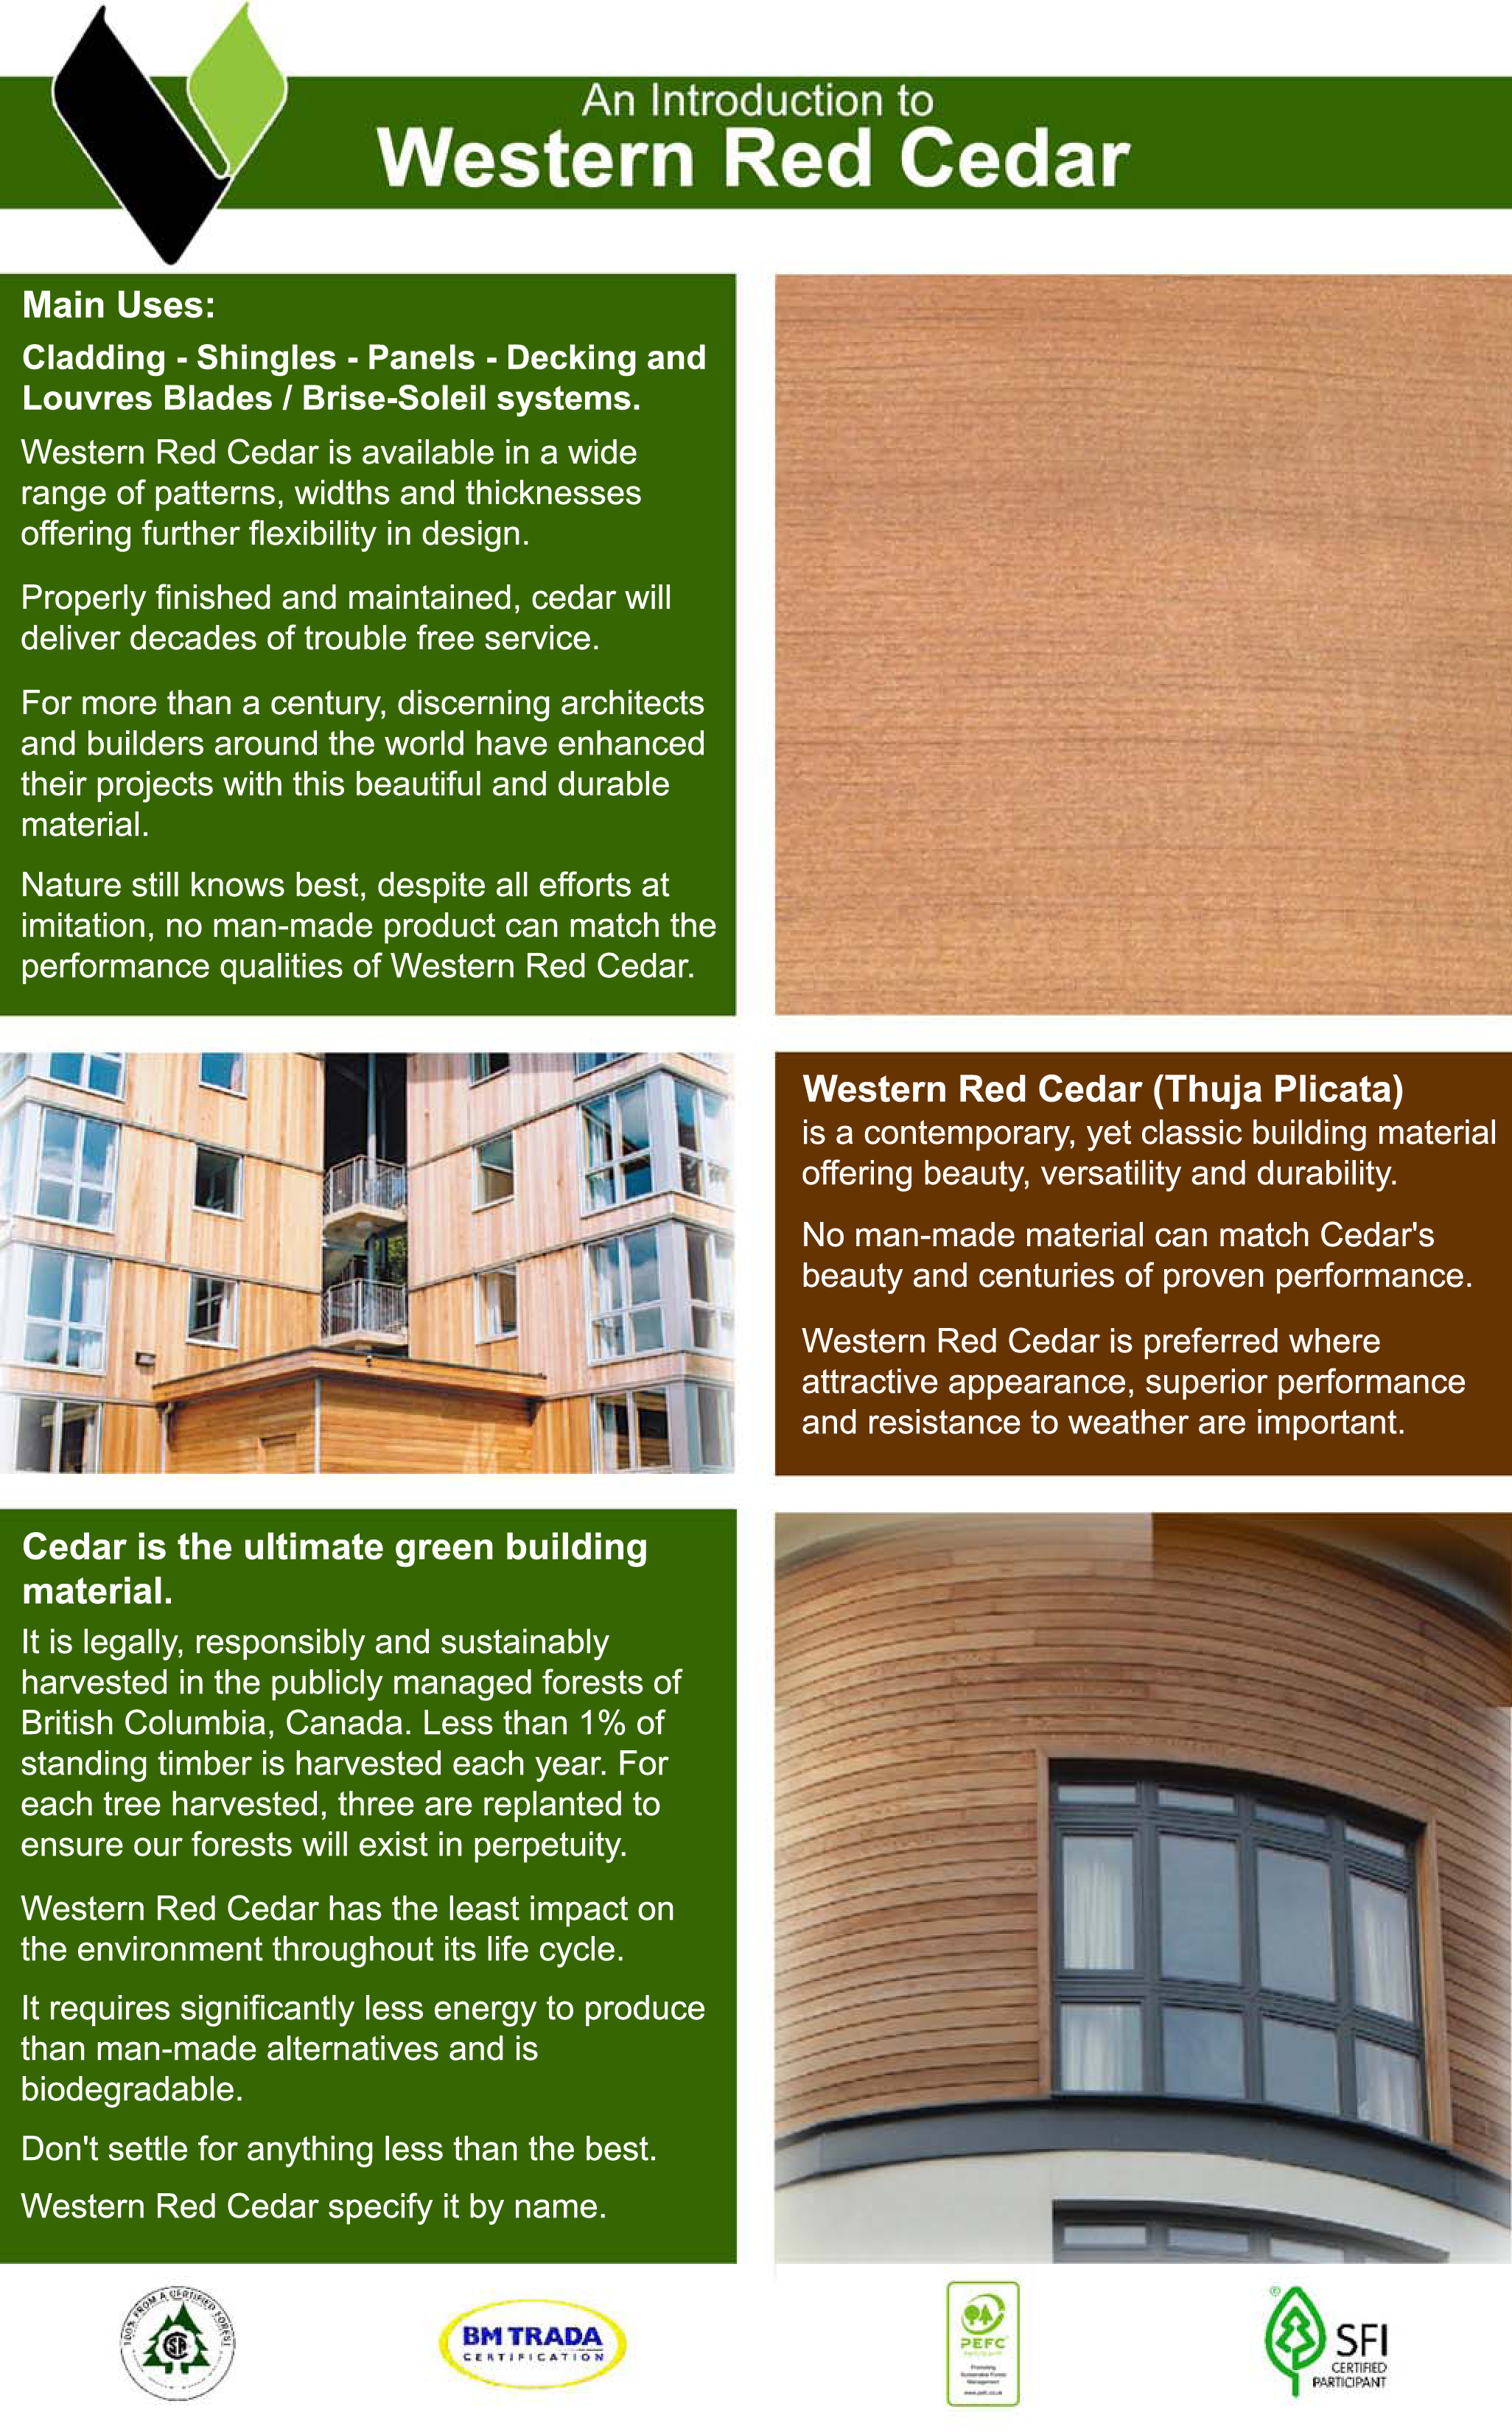 Overview of Western Red Cedar